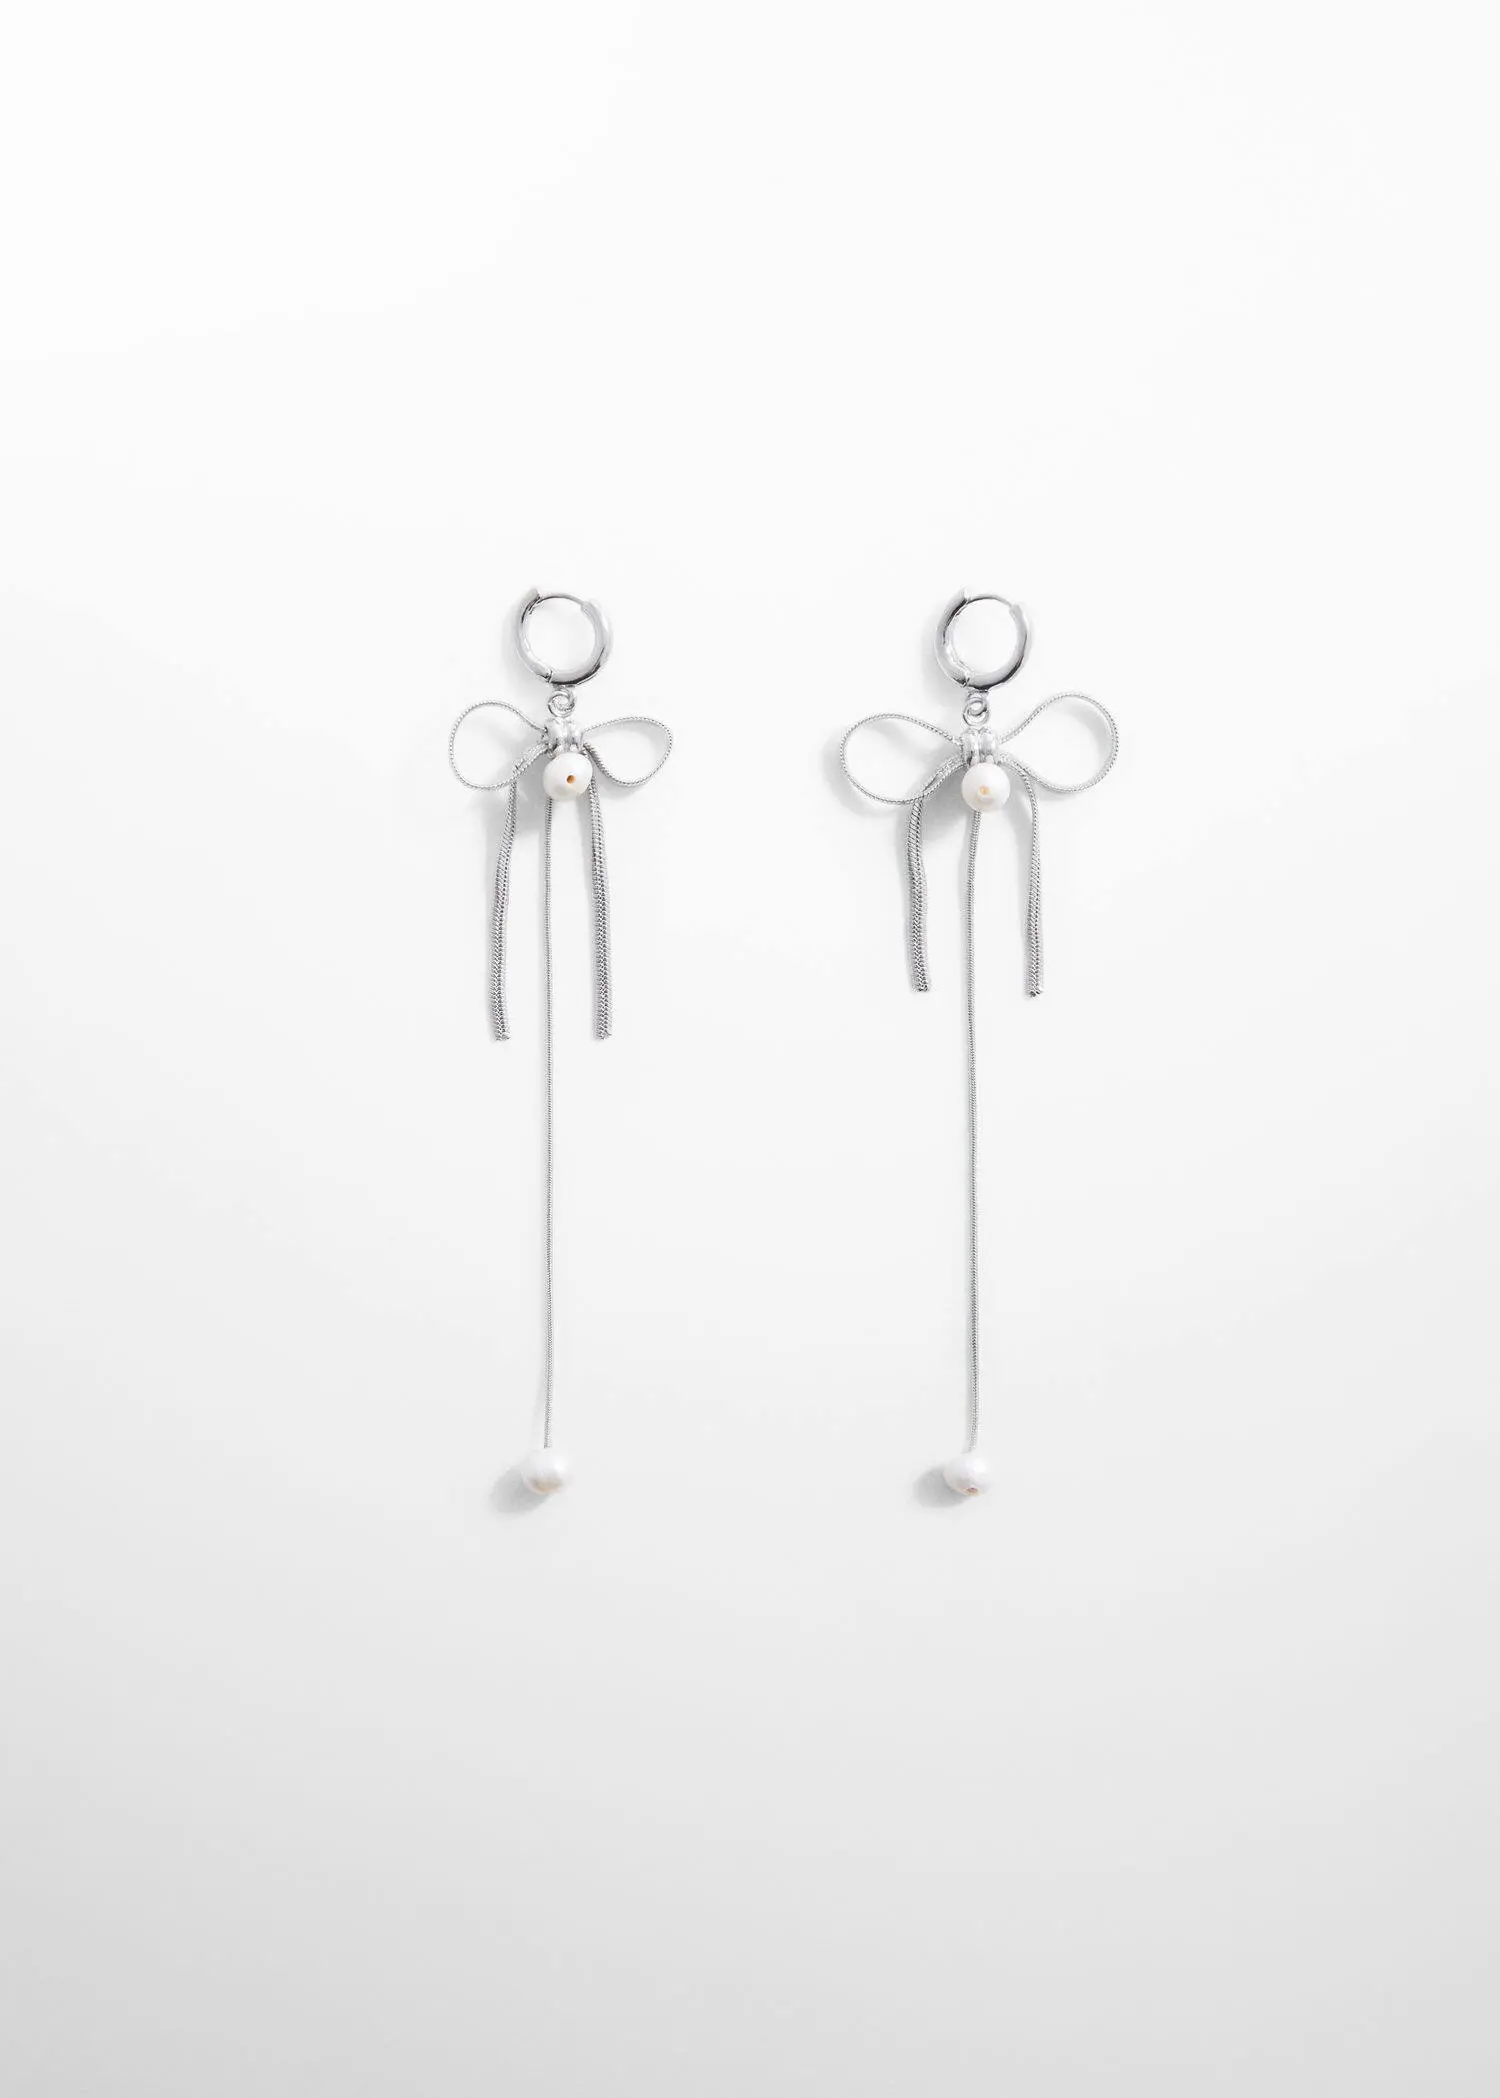 Mango Pearl bow earings. a pair of silver earrings with pearls hanging from them. 